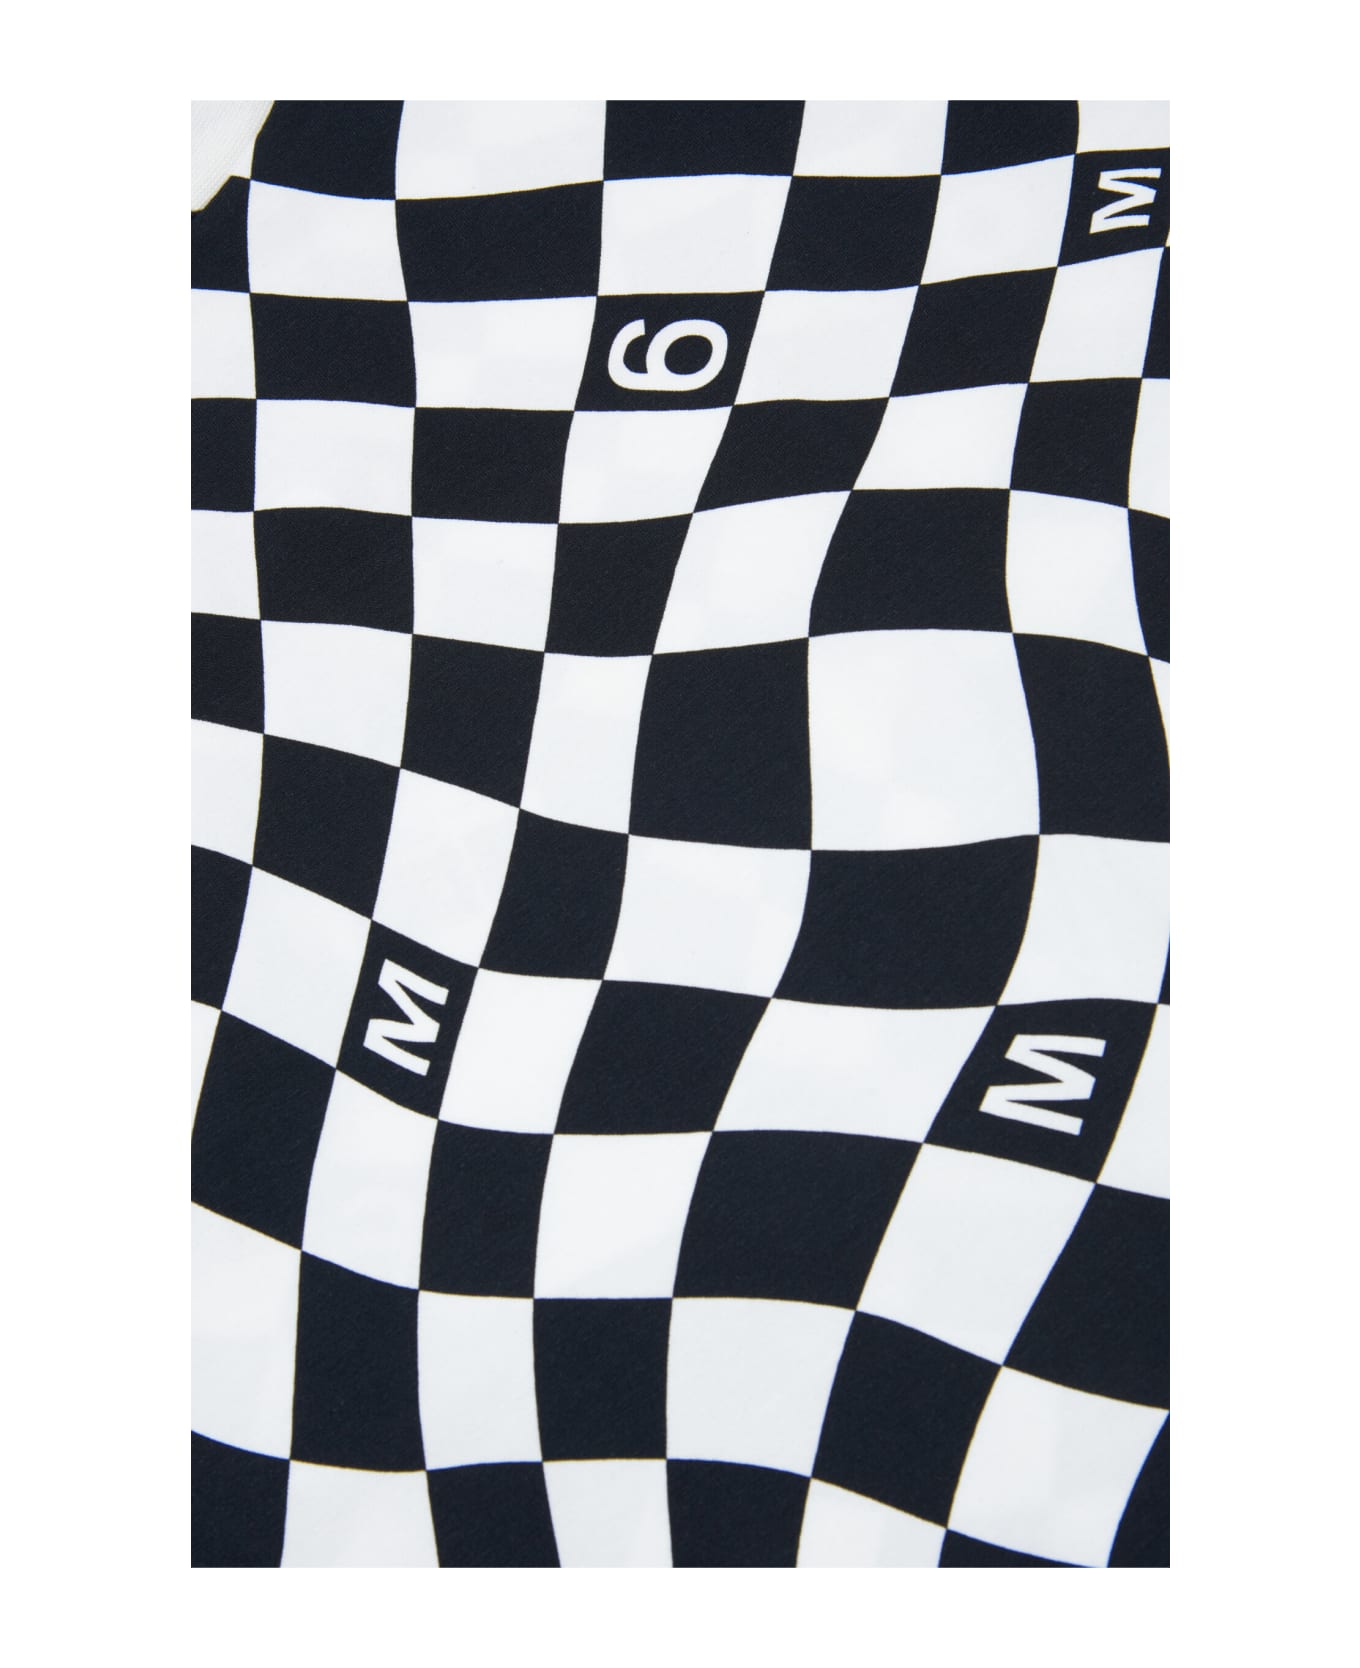 MM6 Maison Margiela Mm6mcu1u Sw Cover-ups Maison Margiela Maxi T-shirt Cover-up With Black And White Chequered Pattern - White/black